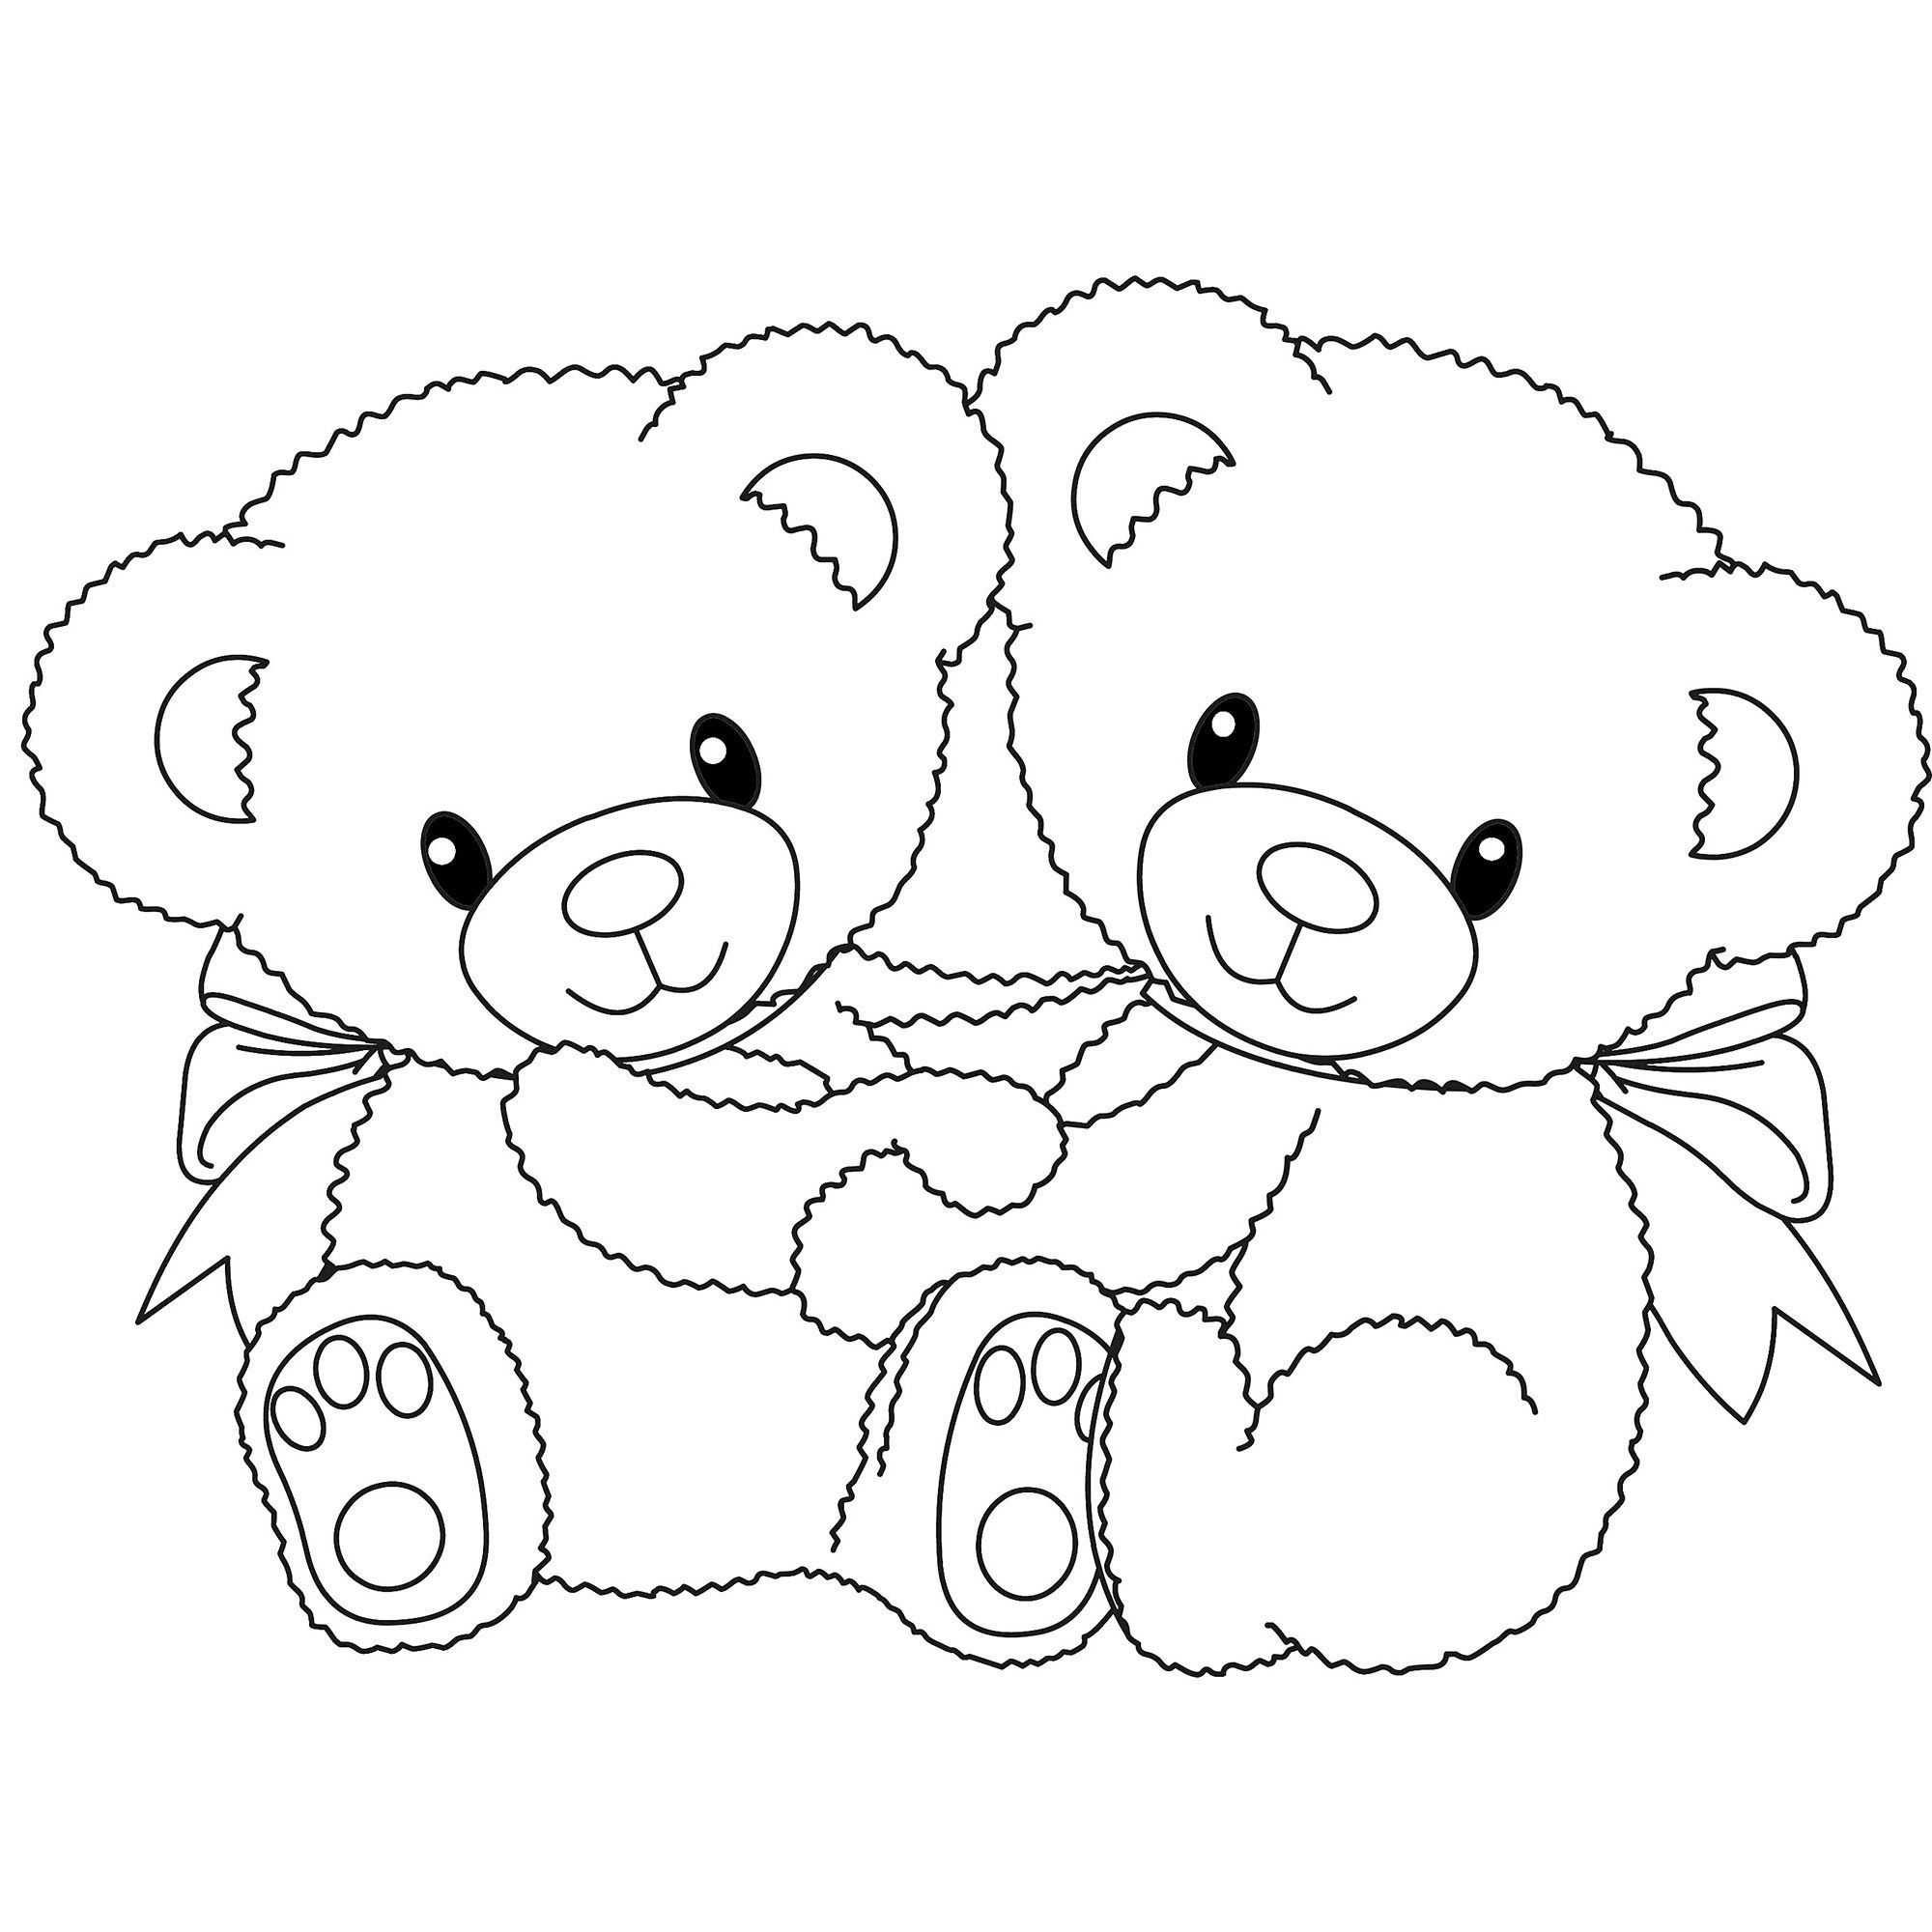 Teddy Bear Coloring Pages Free Printable Coloring Pages | Fun - Teddy Bear Coloring Pages Free Printable